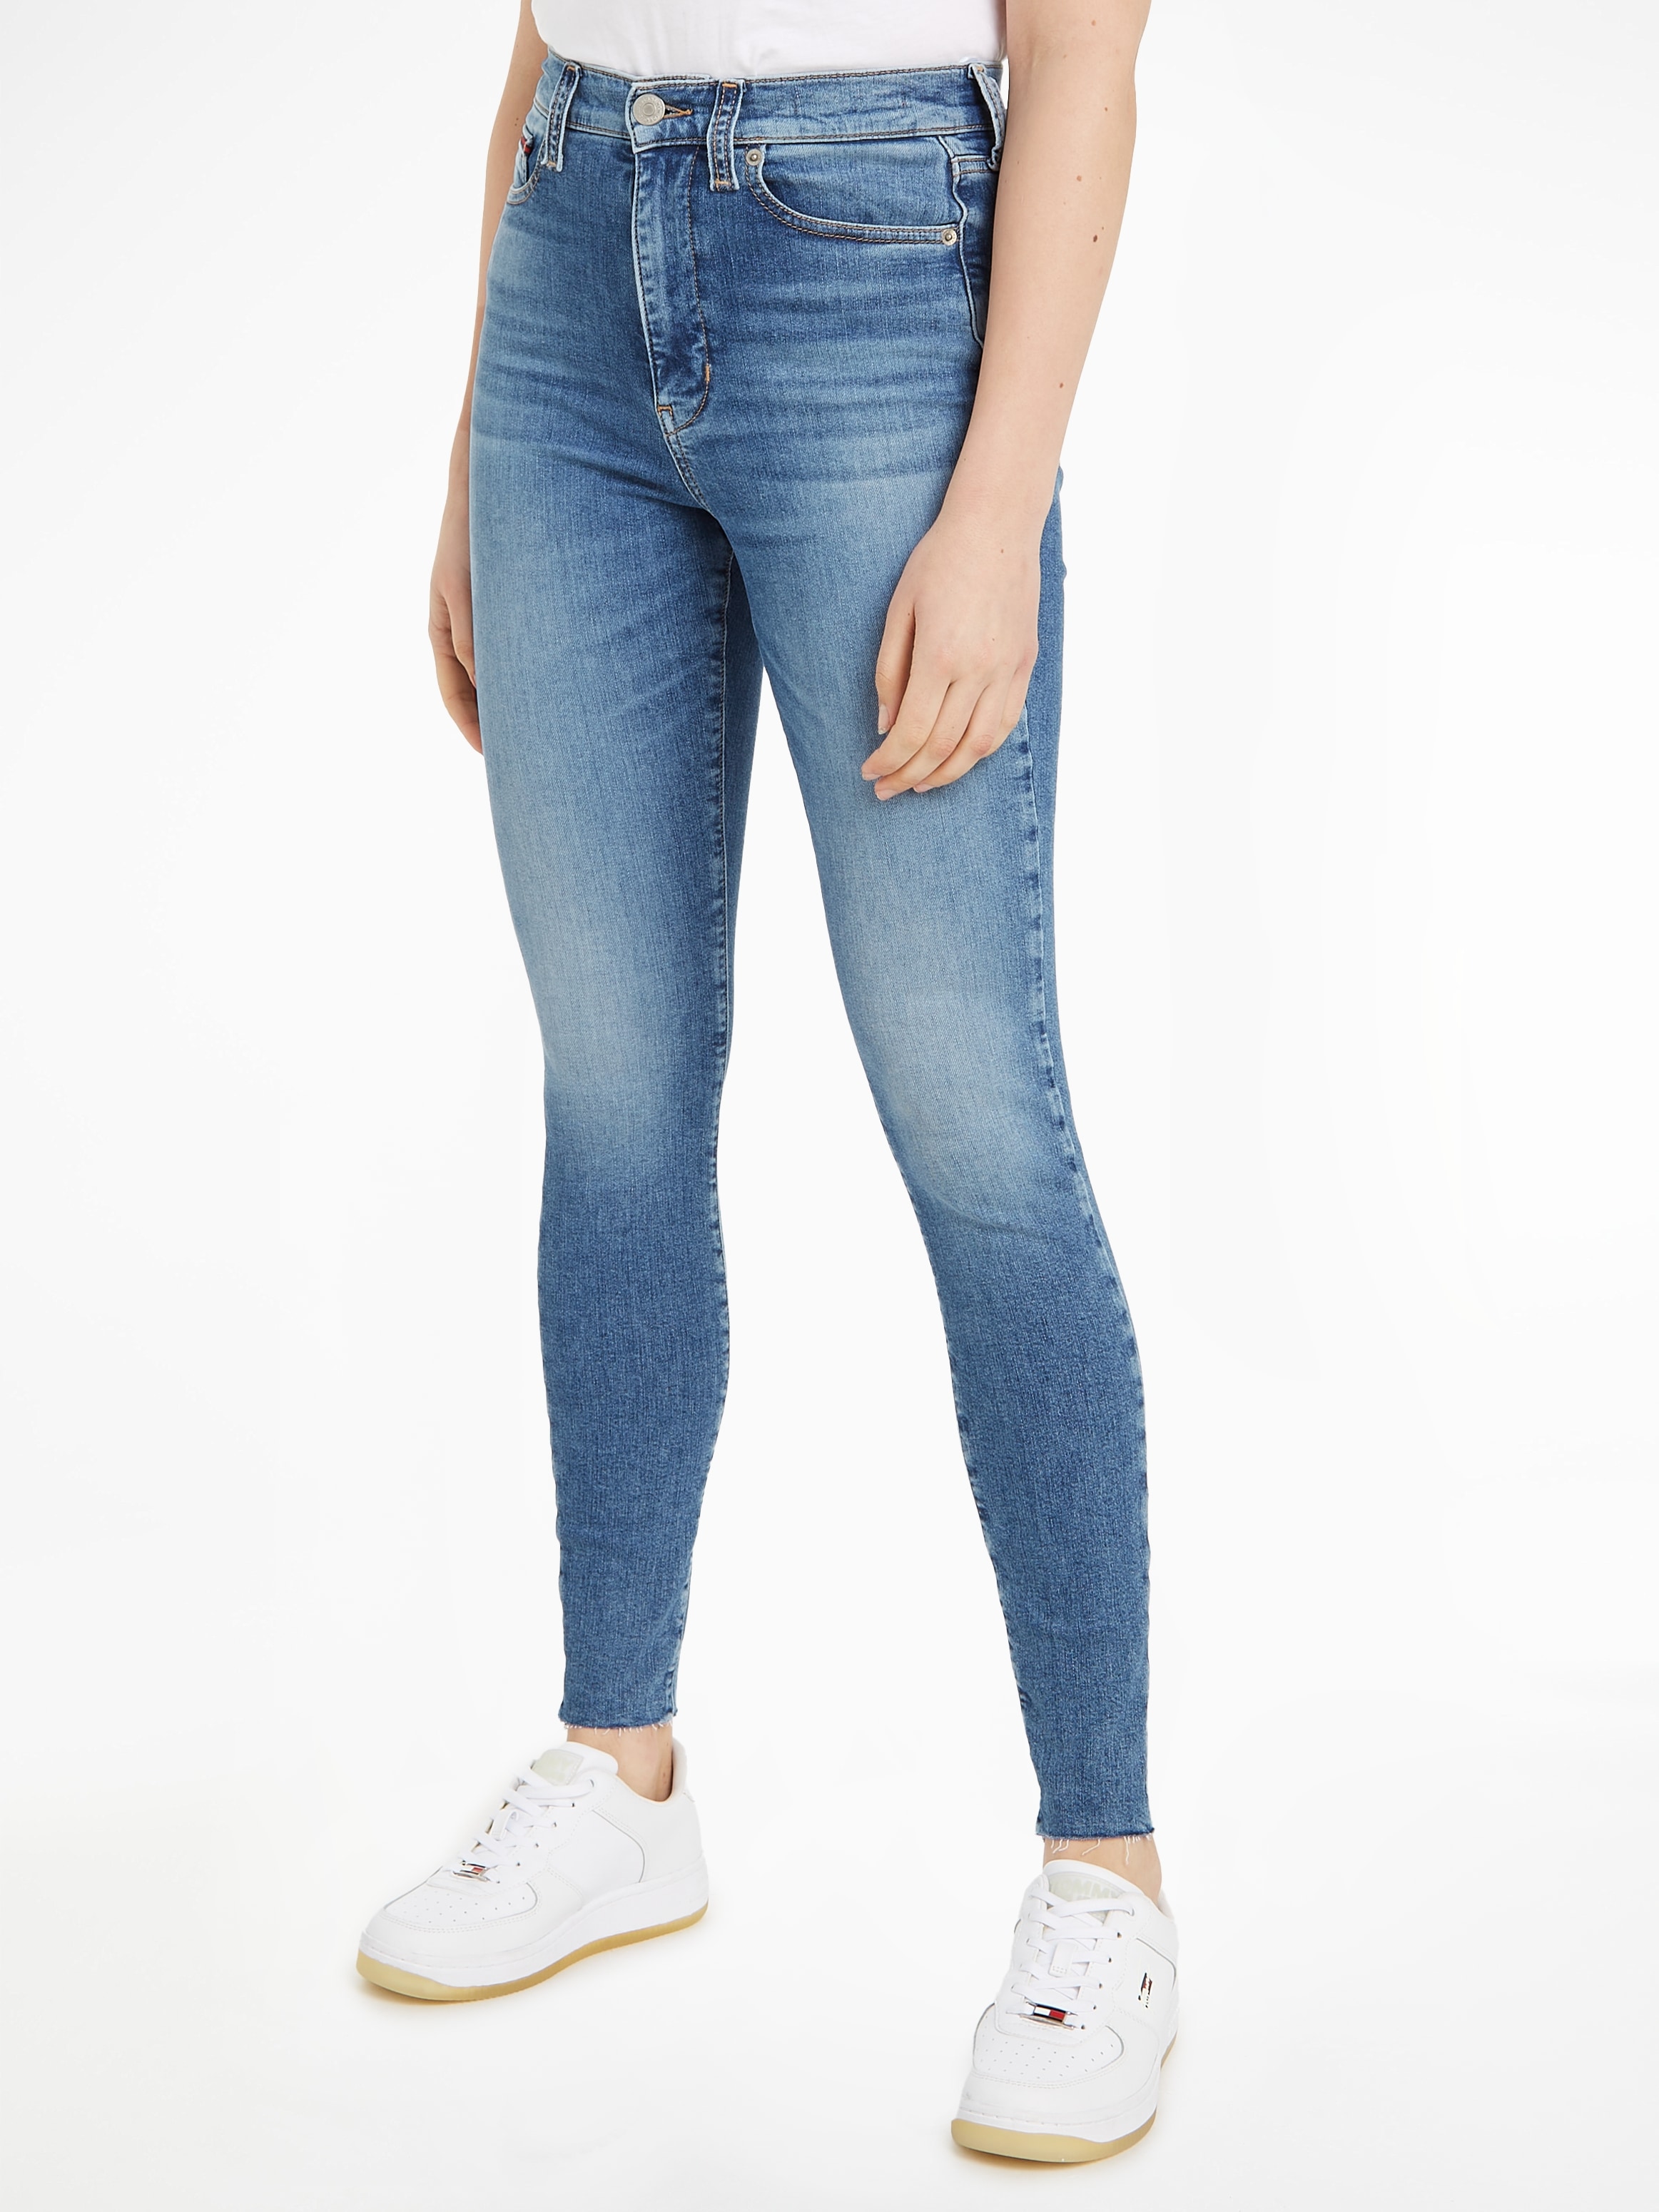 Tommy Jeans »Jeans shoppen walking Logobadge CG4«, mit Skinny-fit-Jeans I\'m Labelflags HR SYLVIA und | SSKN